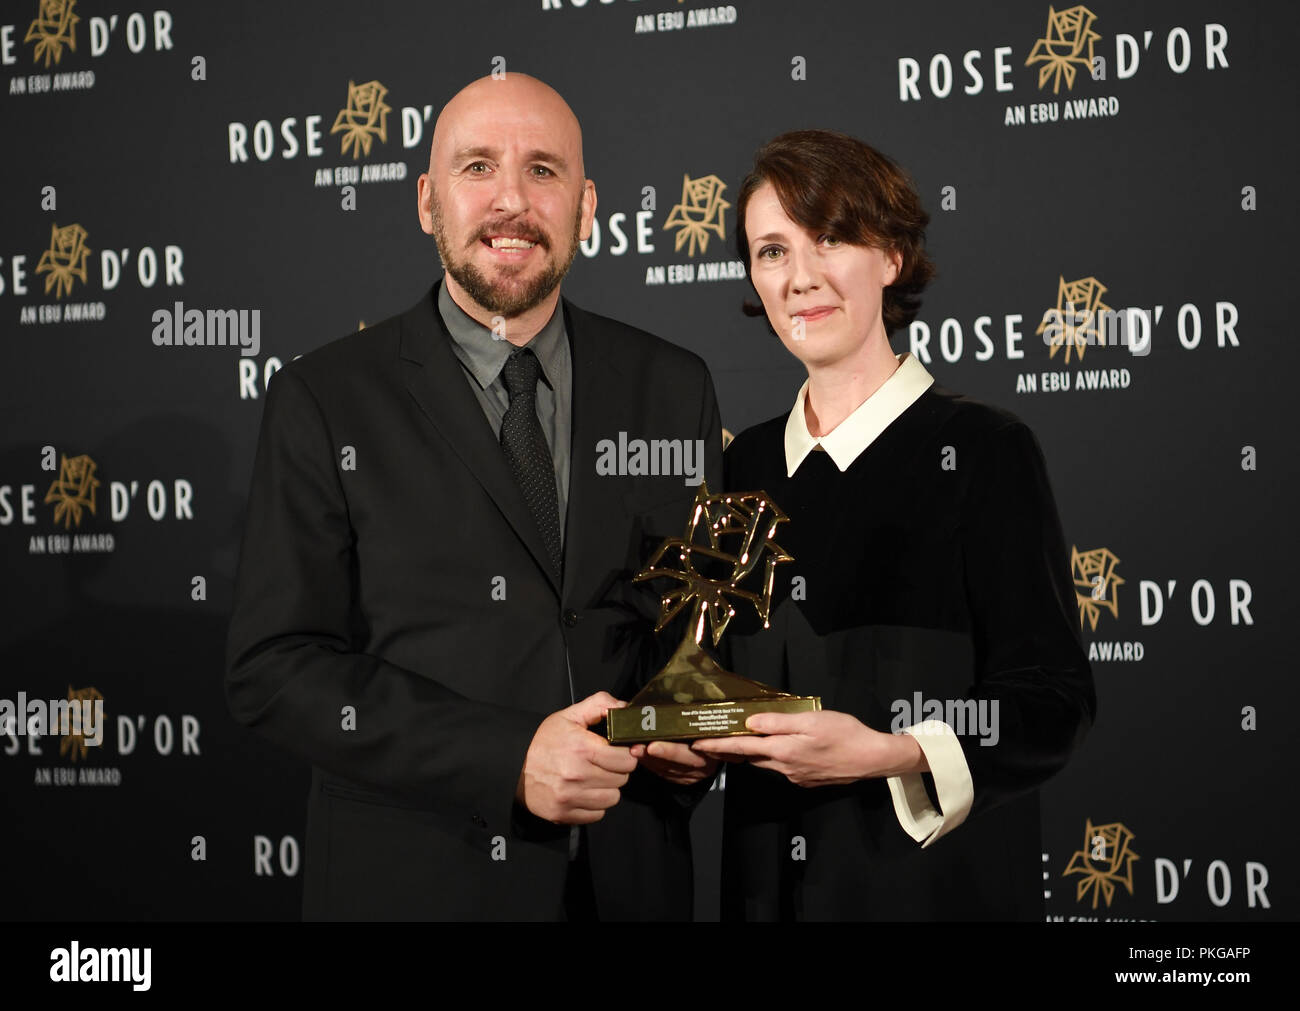 13 September 2018, Berlin: 13 September 2018, Germany, Berlin: Jeff Tudor,  producer, and Adrienne Liron, producer, are delighted to be awarded the Rose  d'Or/Goldene Rose Television Prize in the "Arts" category at